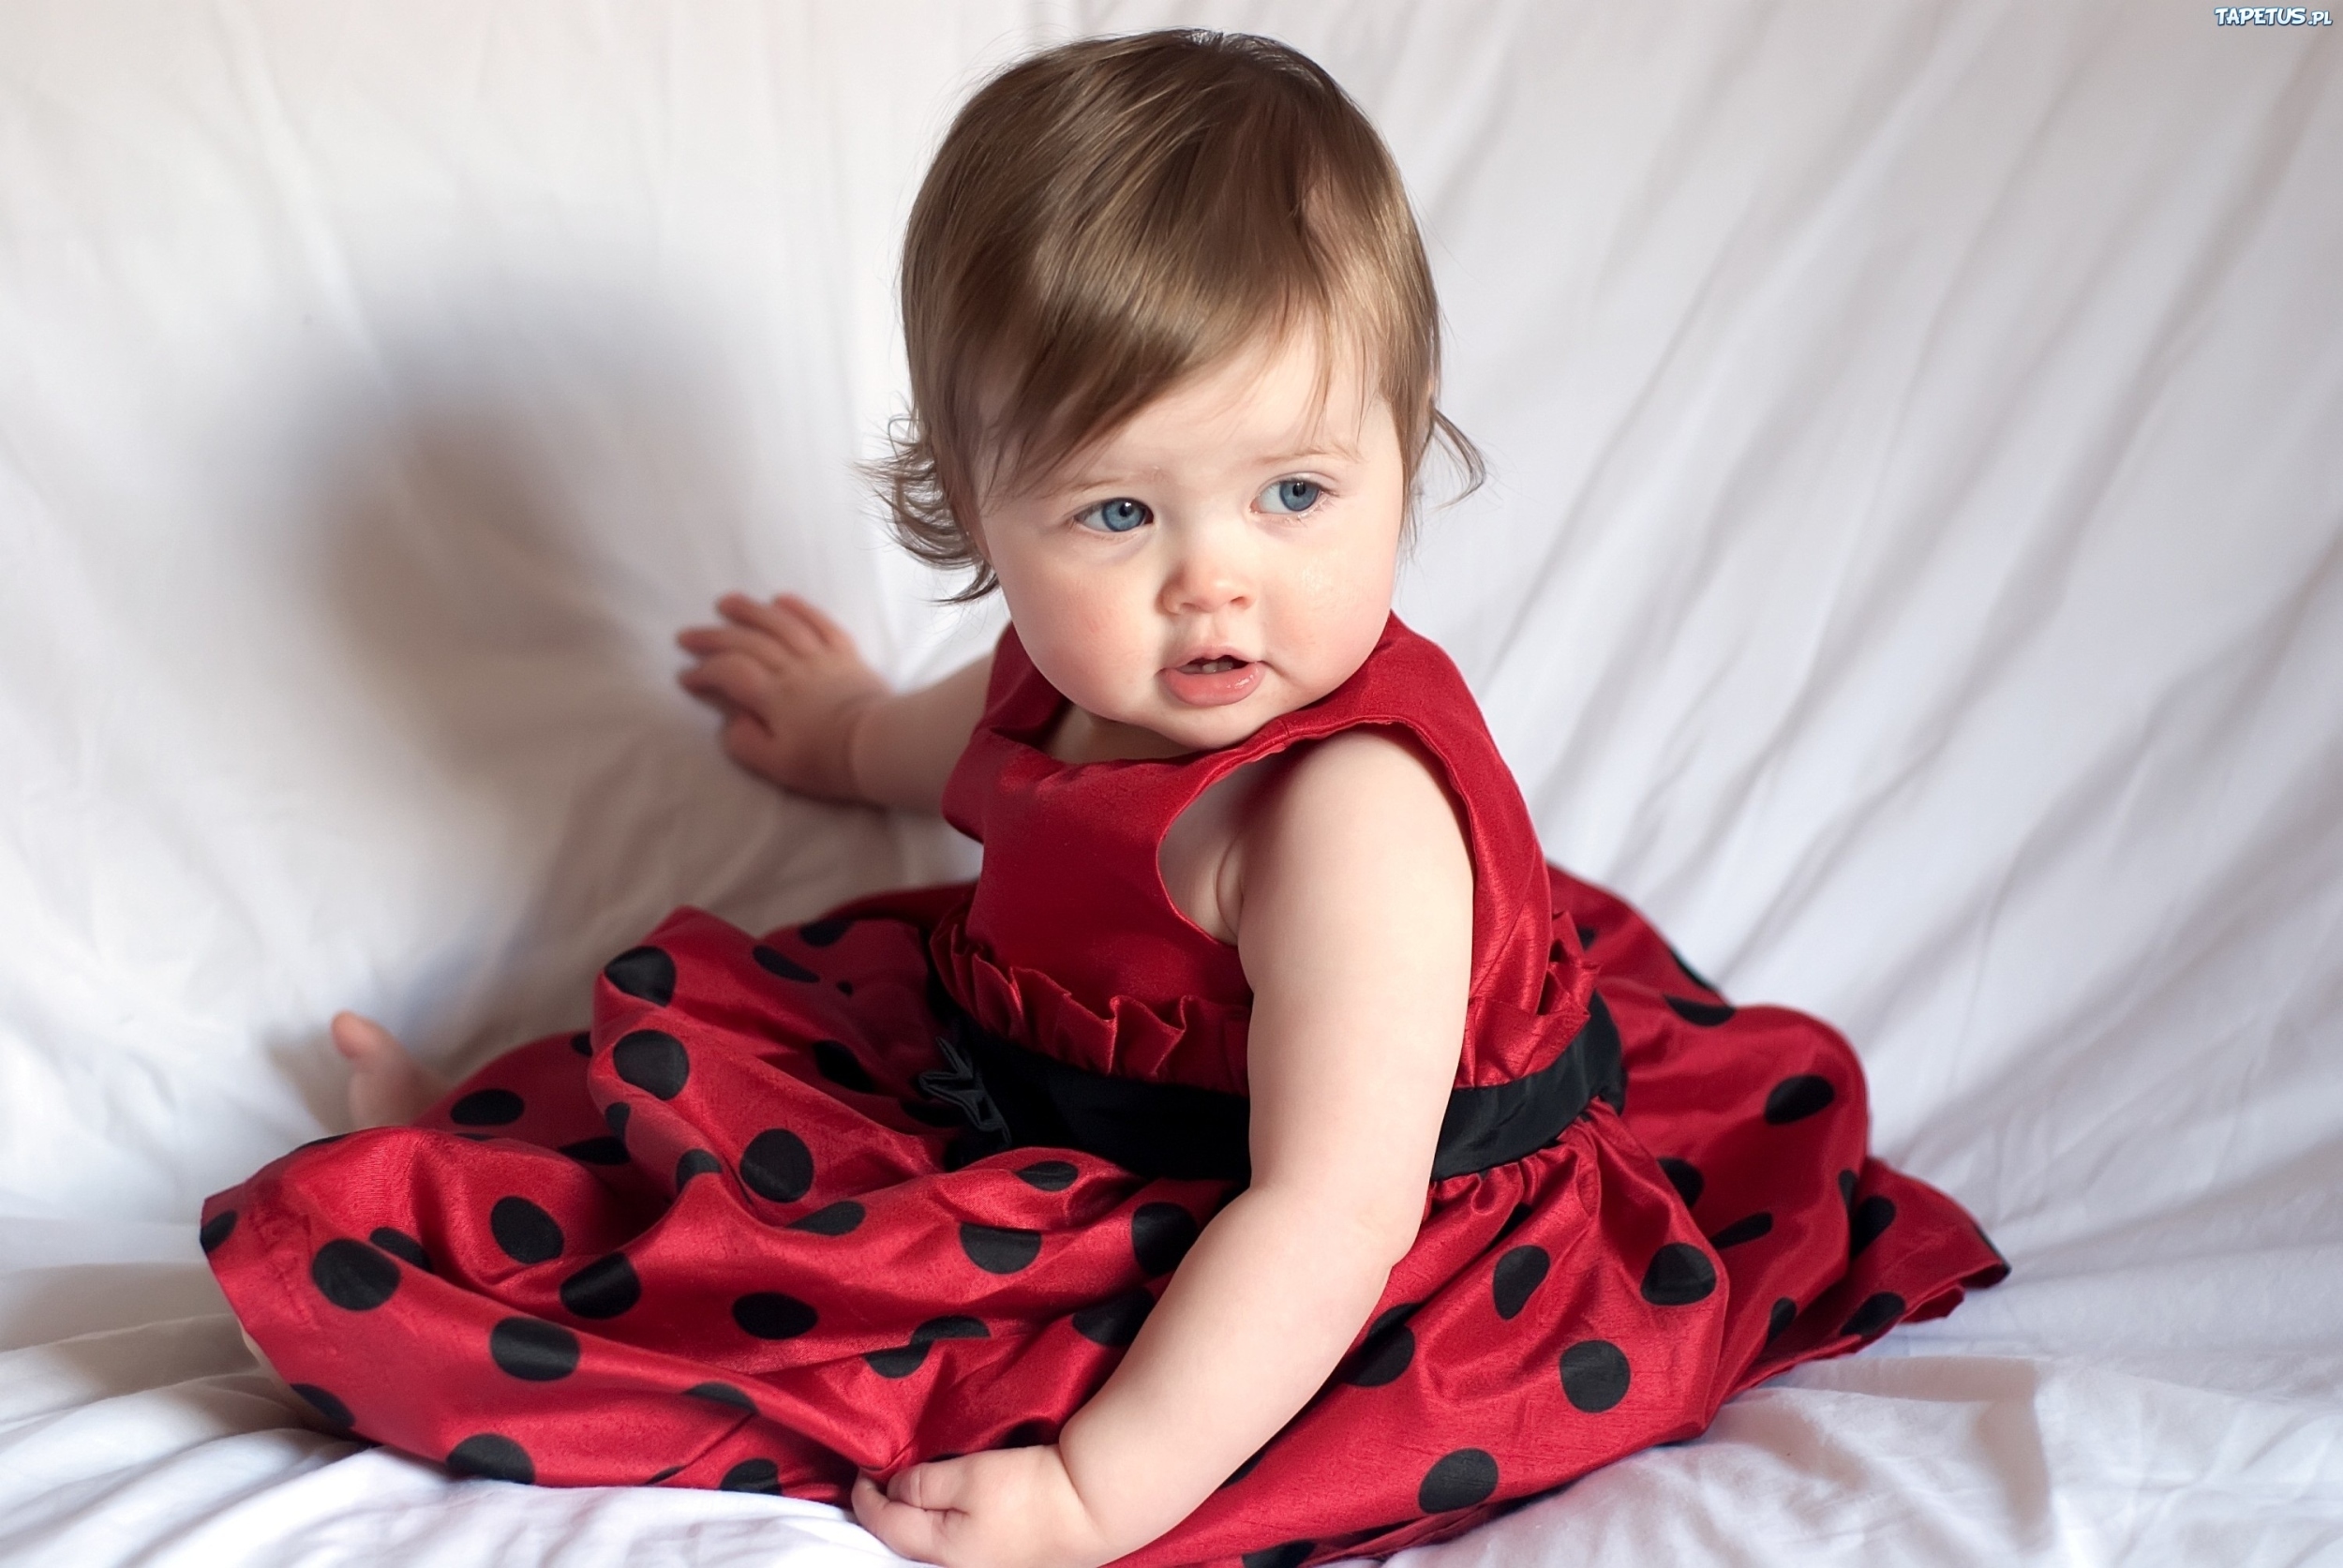 Red Dress Newborn And Perfect Choices